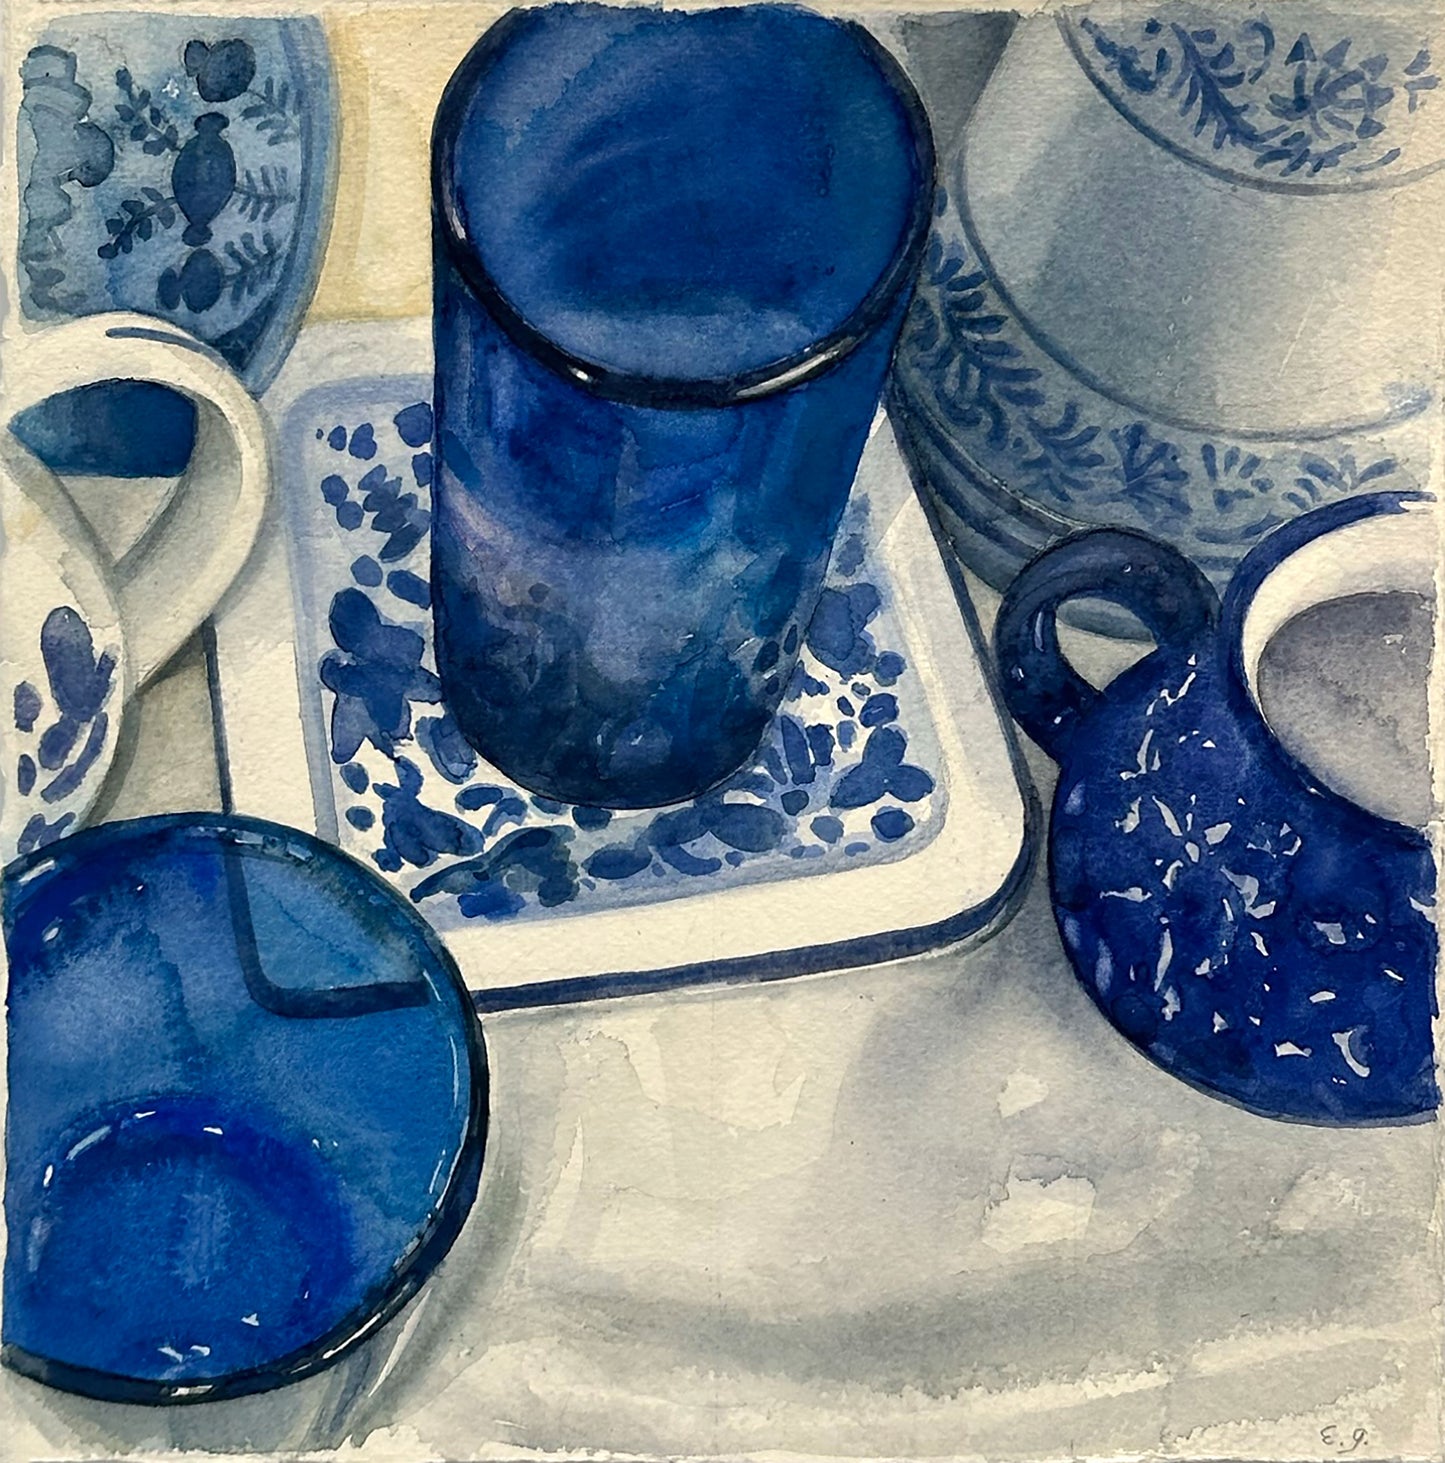 Blue Glasses And Dishware